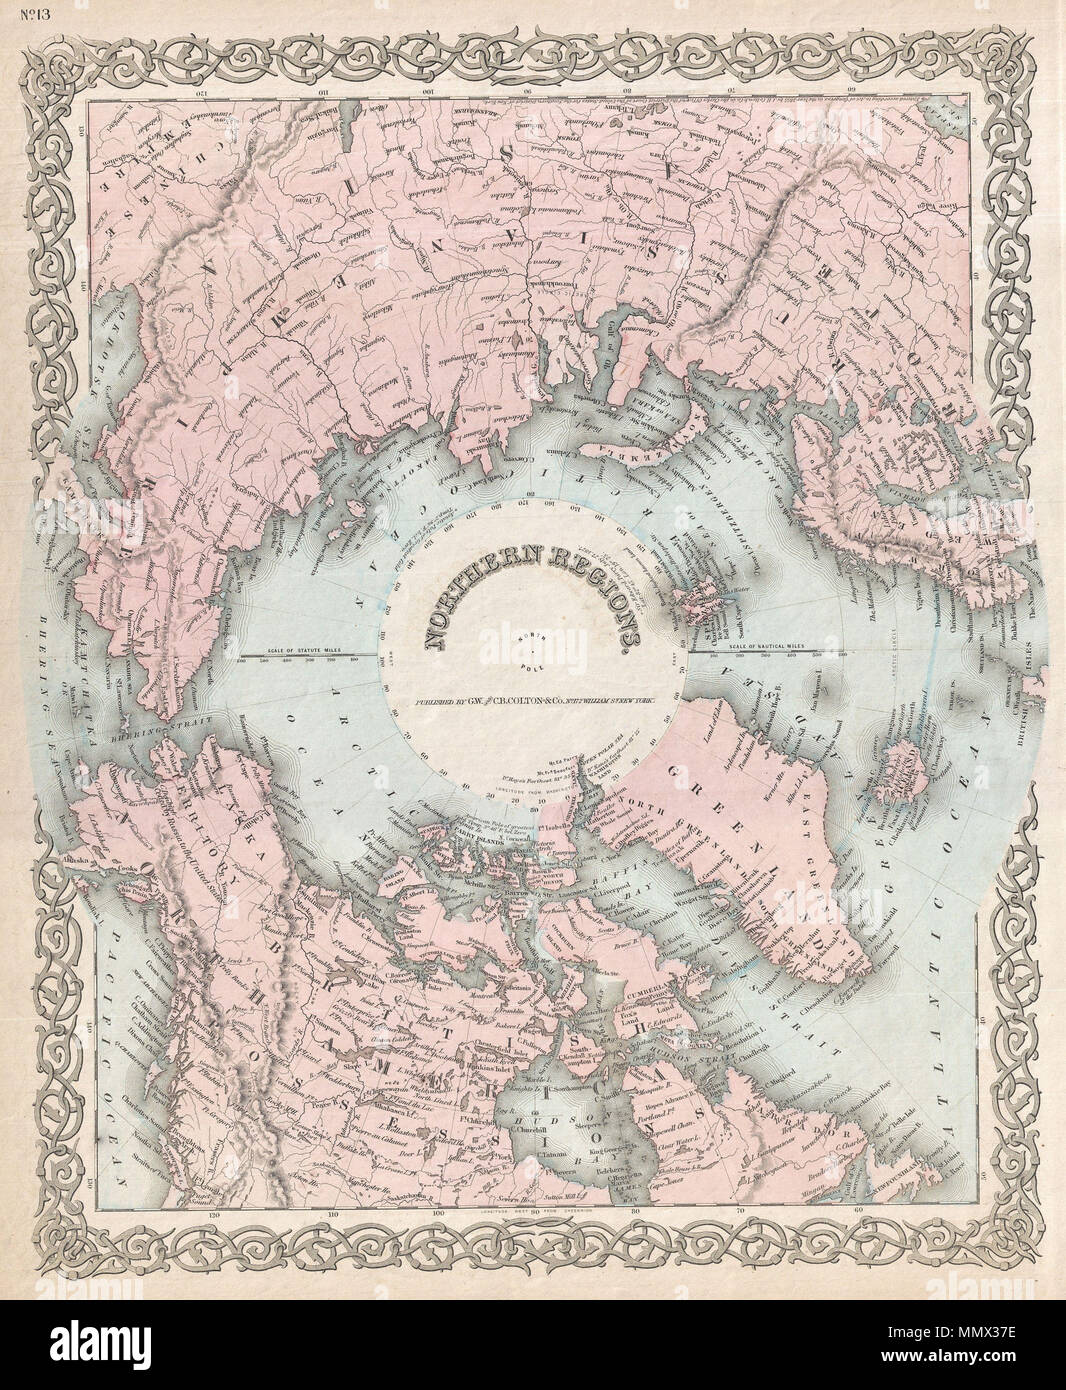 .  English: A rarely seen variant state of Colton’s map of the North Pole or Arctic. Covers from Lake Baikal, the Hudson Bay, the British Isles and Kamchatka north to the Pole. Generally gives an excellent overview of the state Arctic exploration and discovery to about 1855. Though this map is not significantly different from earlier editions - the only notable plate change is the replacement of J.H. Colton's imprint with teh G.W. and C.B. Colton imprint - however it is unique in that color has been added. All previous editions of this map were in black and white. Prepared by G. W. and C. B. C Stock Photo